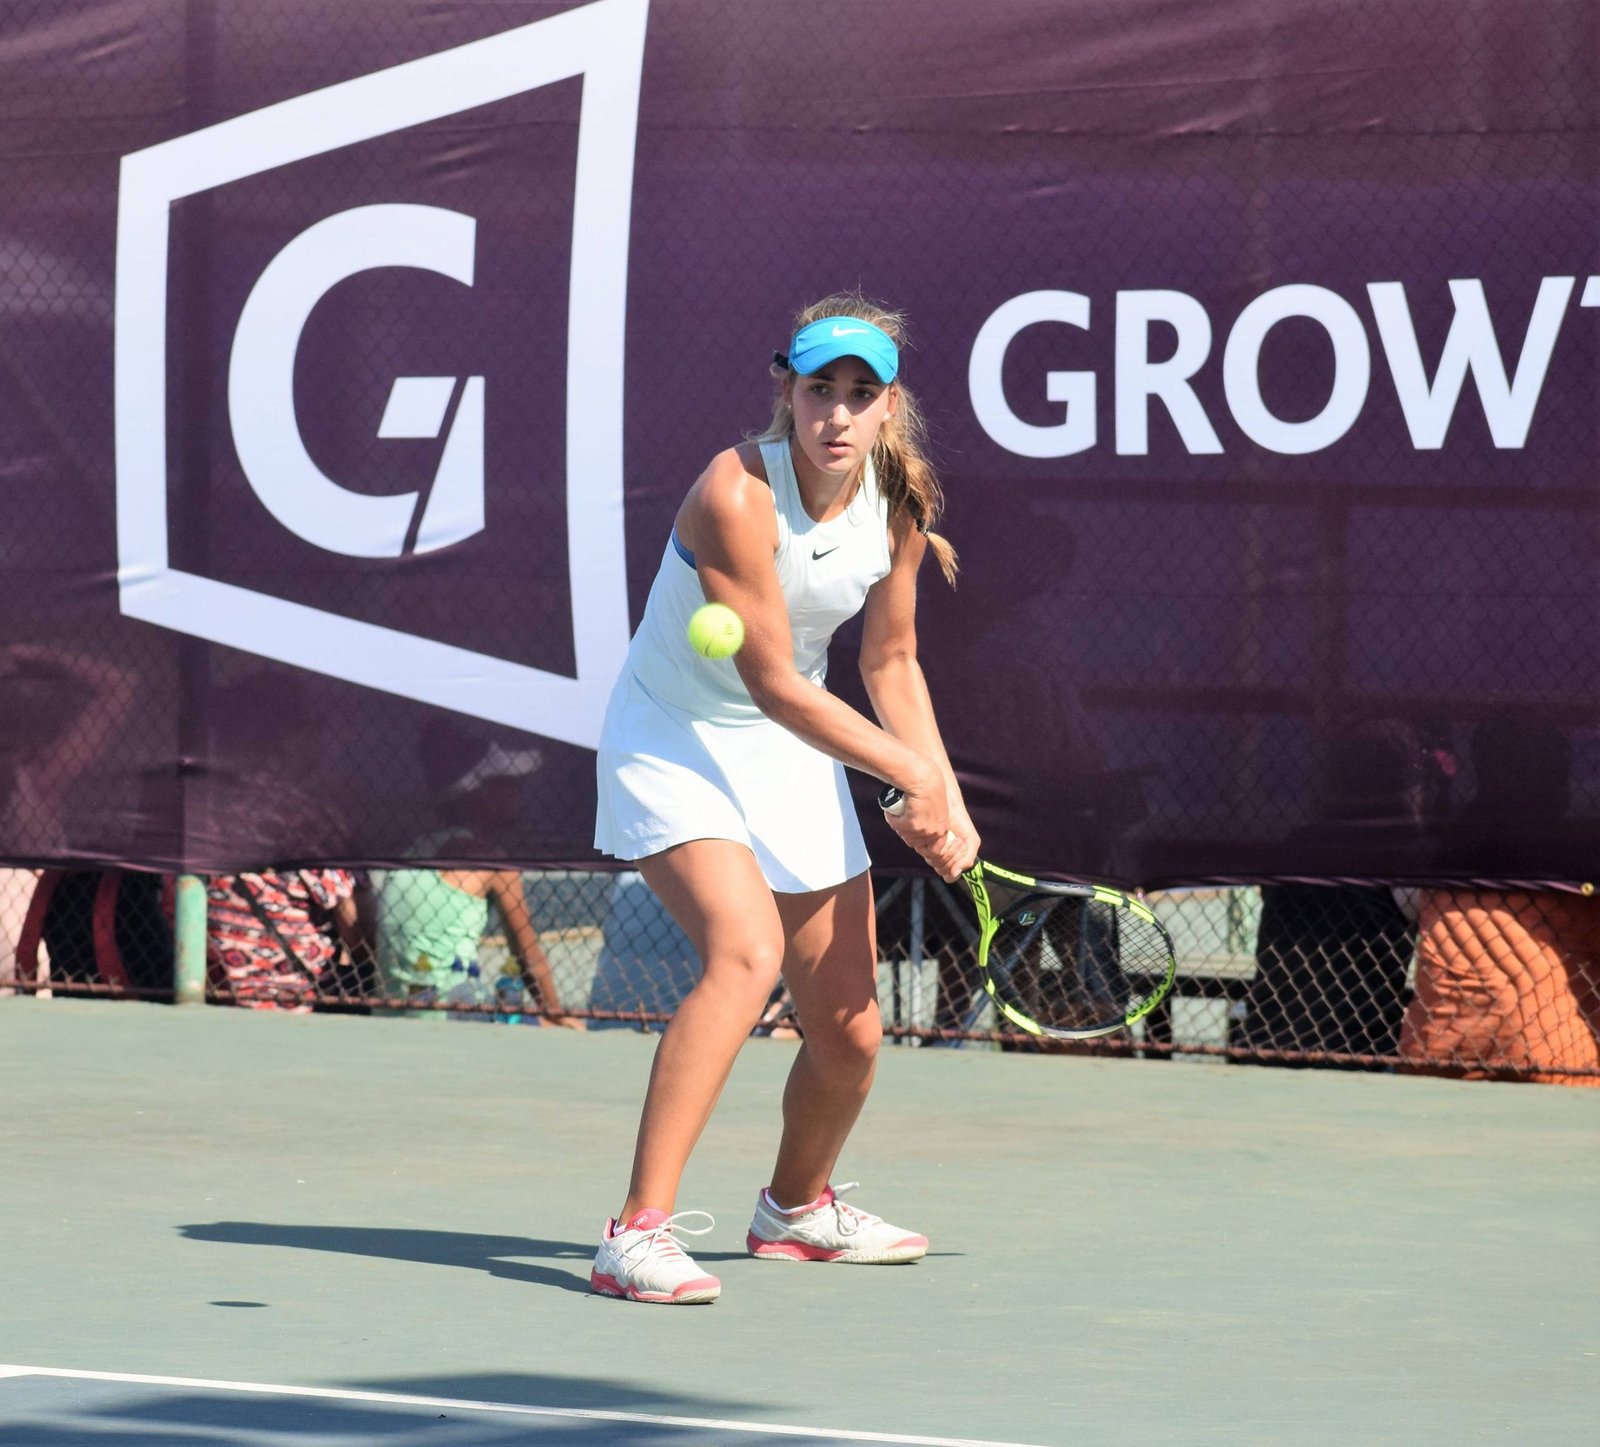 Potchefstroom to host international tennis events in March - Sports Leo